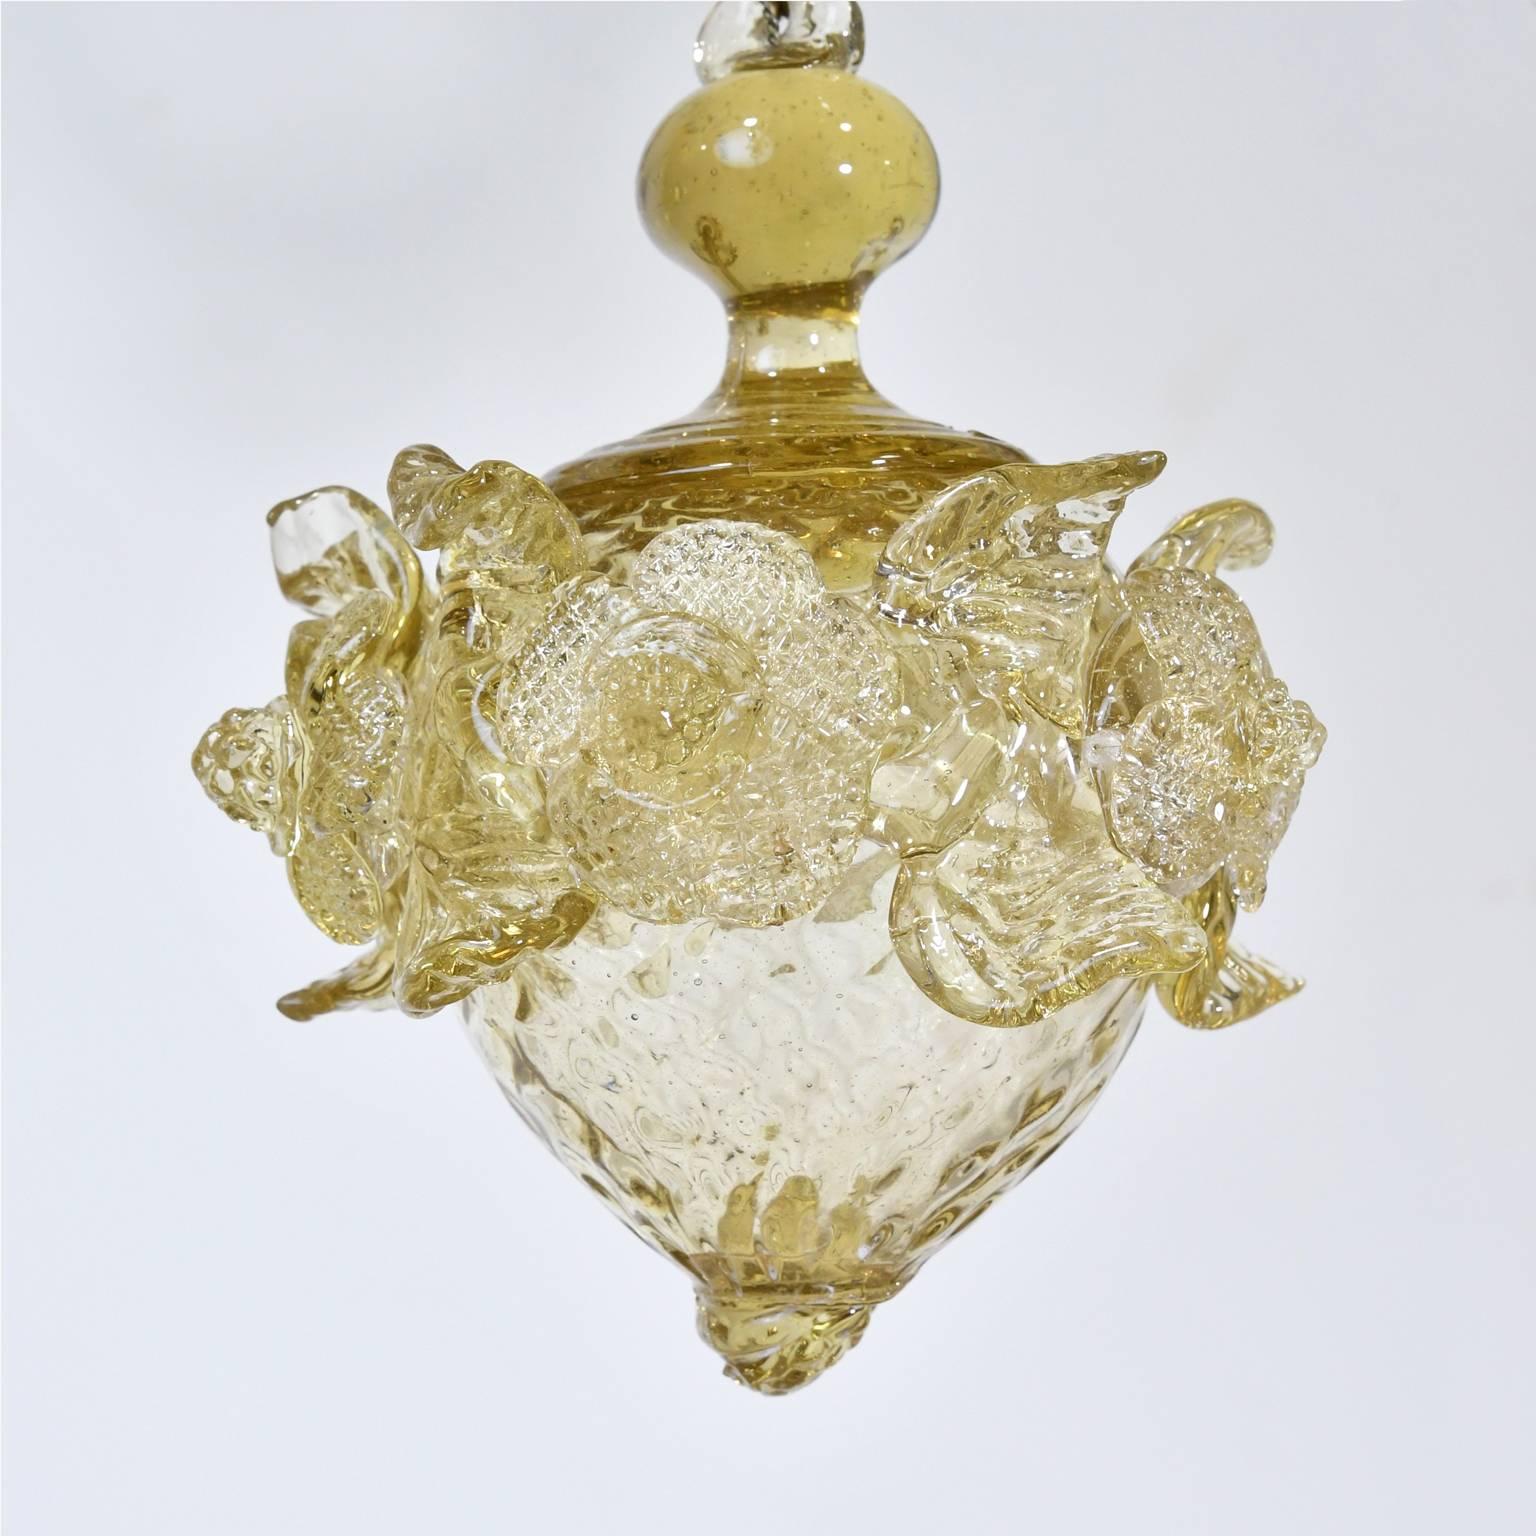 Molded Large 20th Century Venetian Murano Glass Chandelier with Six Arms